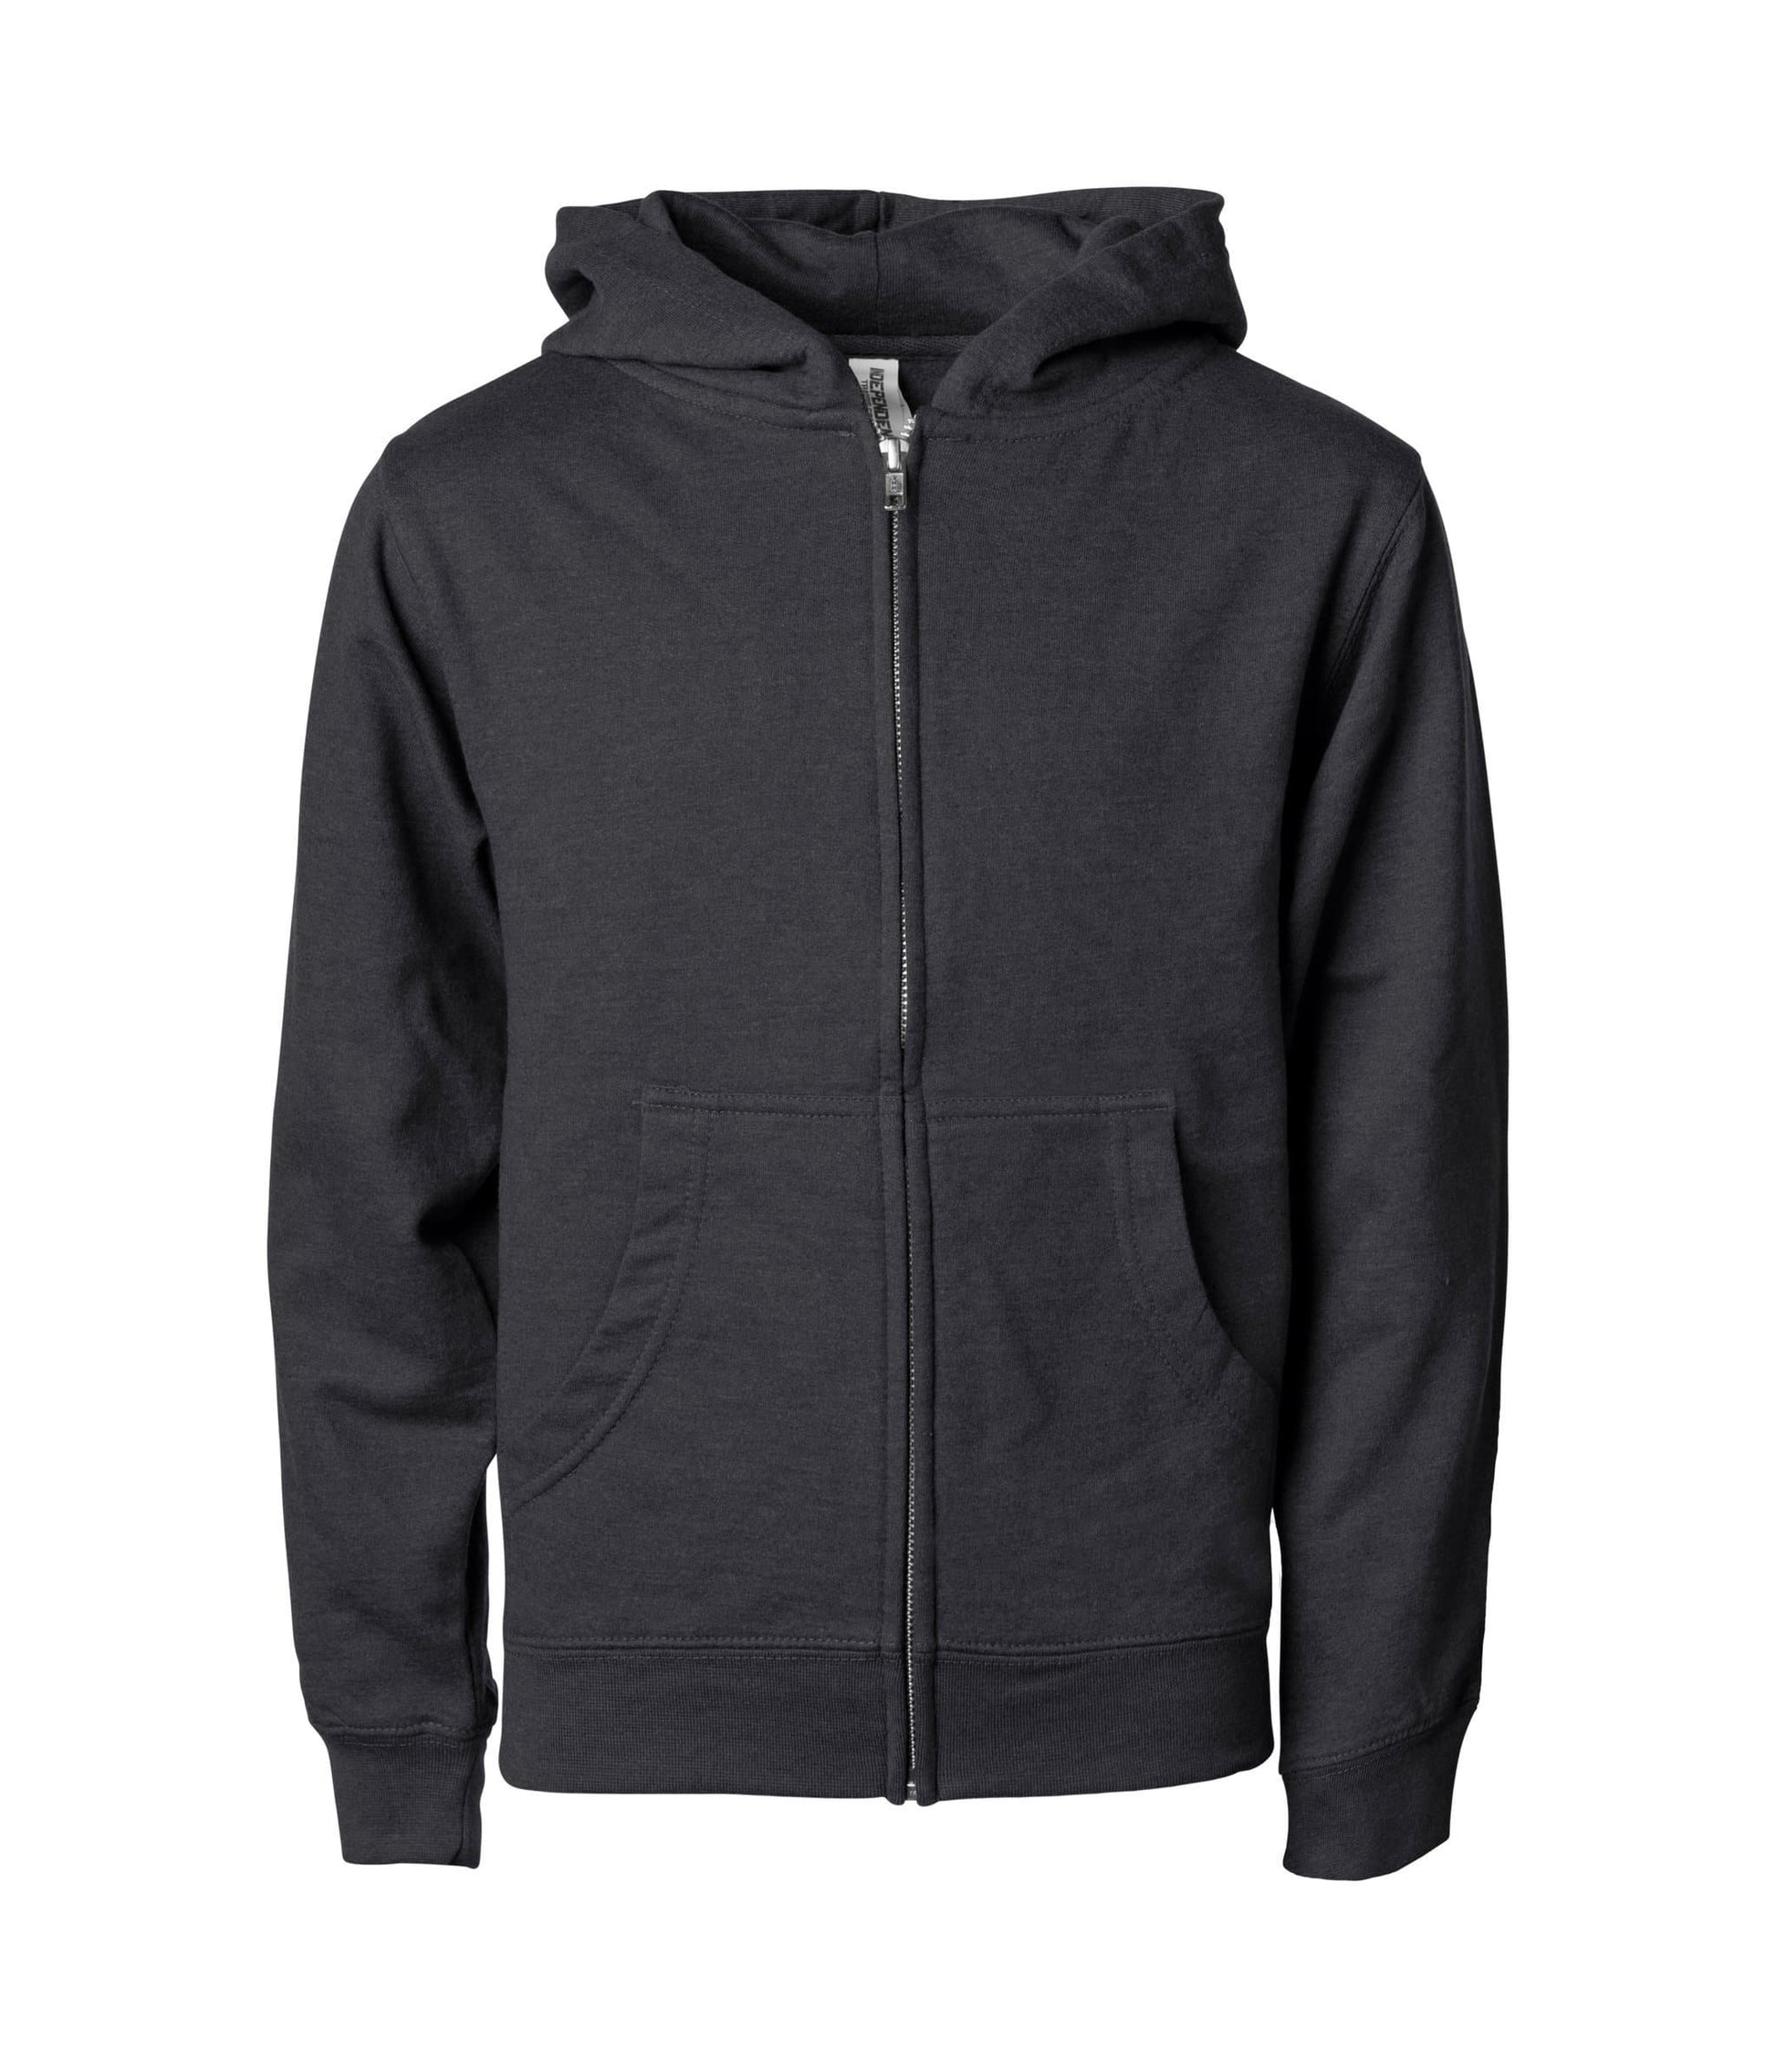 SS4001YZ Youth Midweight Zip Hooded Sweatshirt - Charcoal